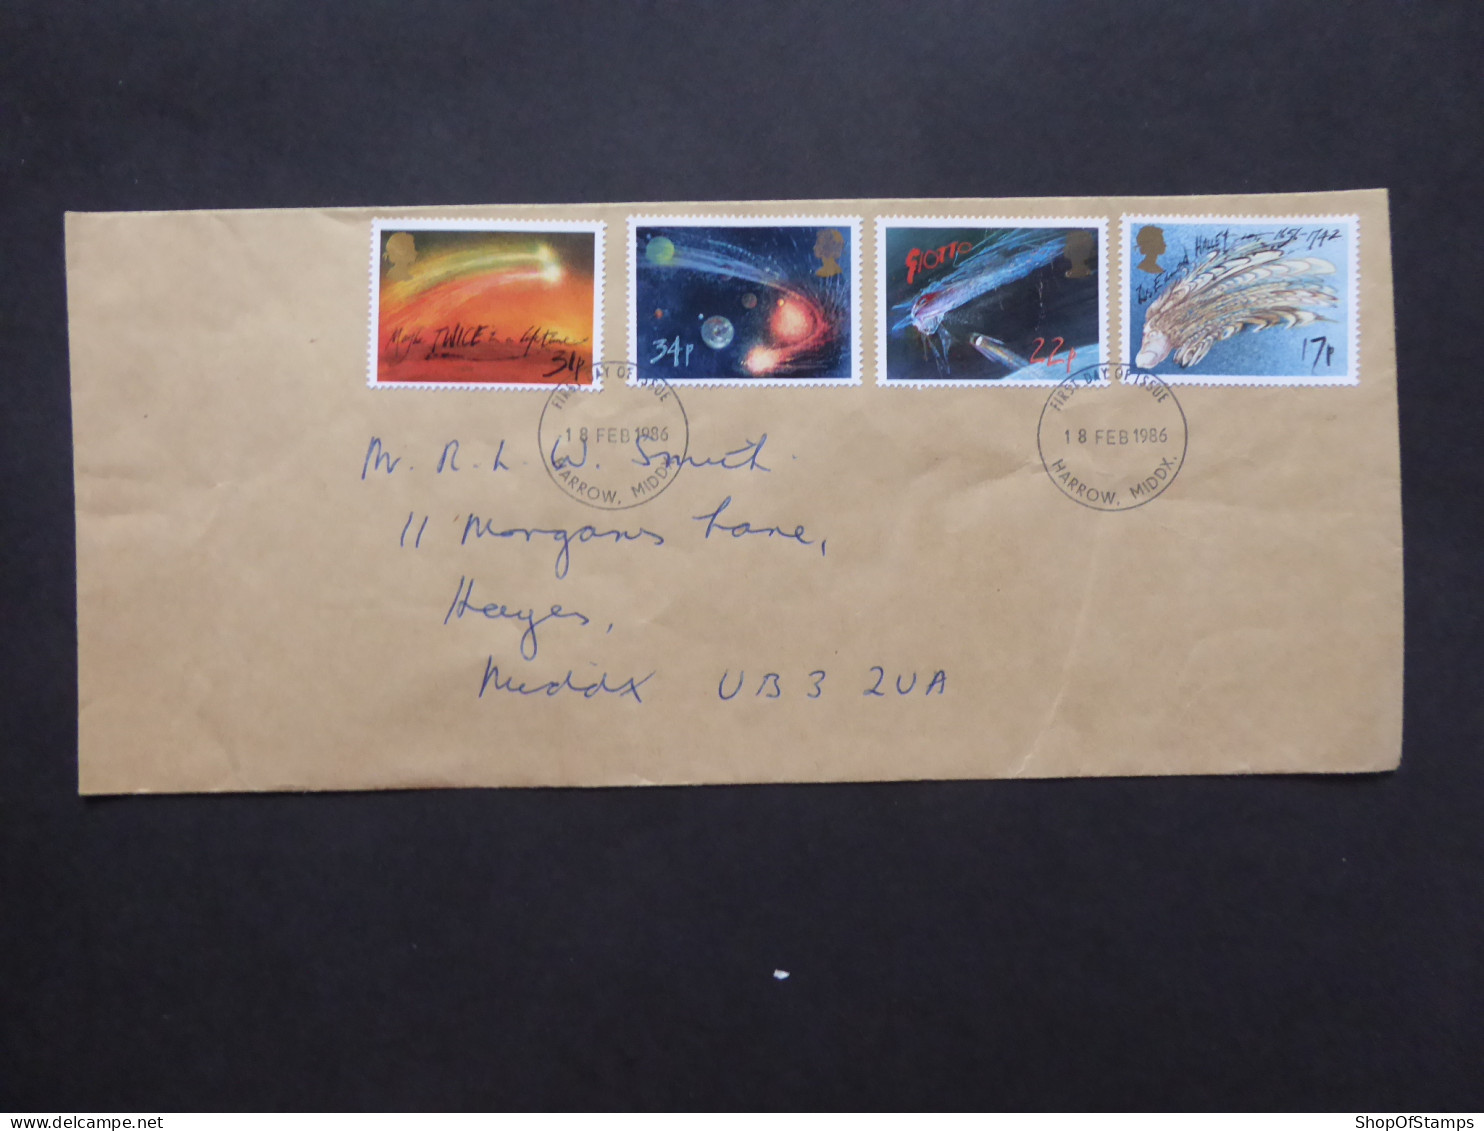 GREAT BRITAIN SG 1312-15 APPEARANCE OF HALLEY'S COMET FDC    - Unclassified